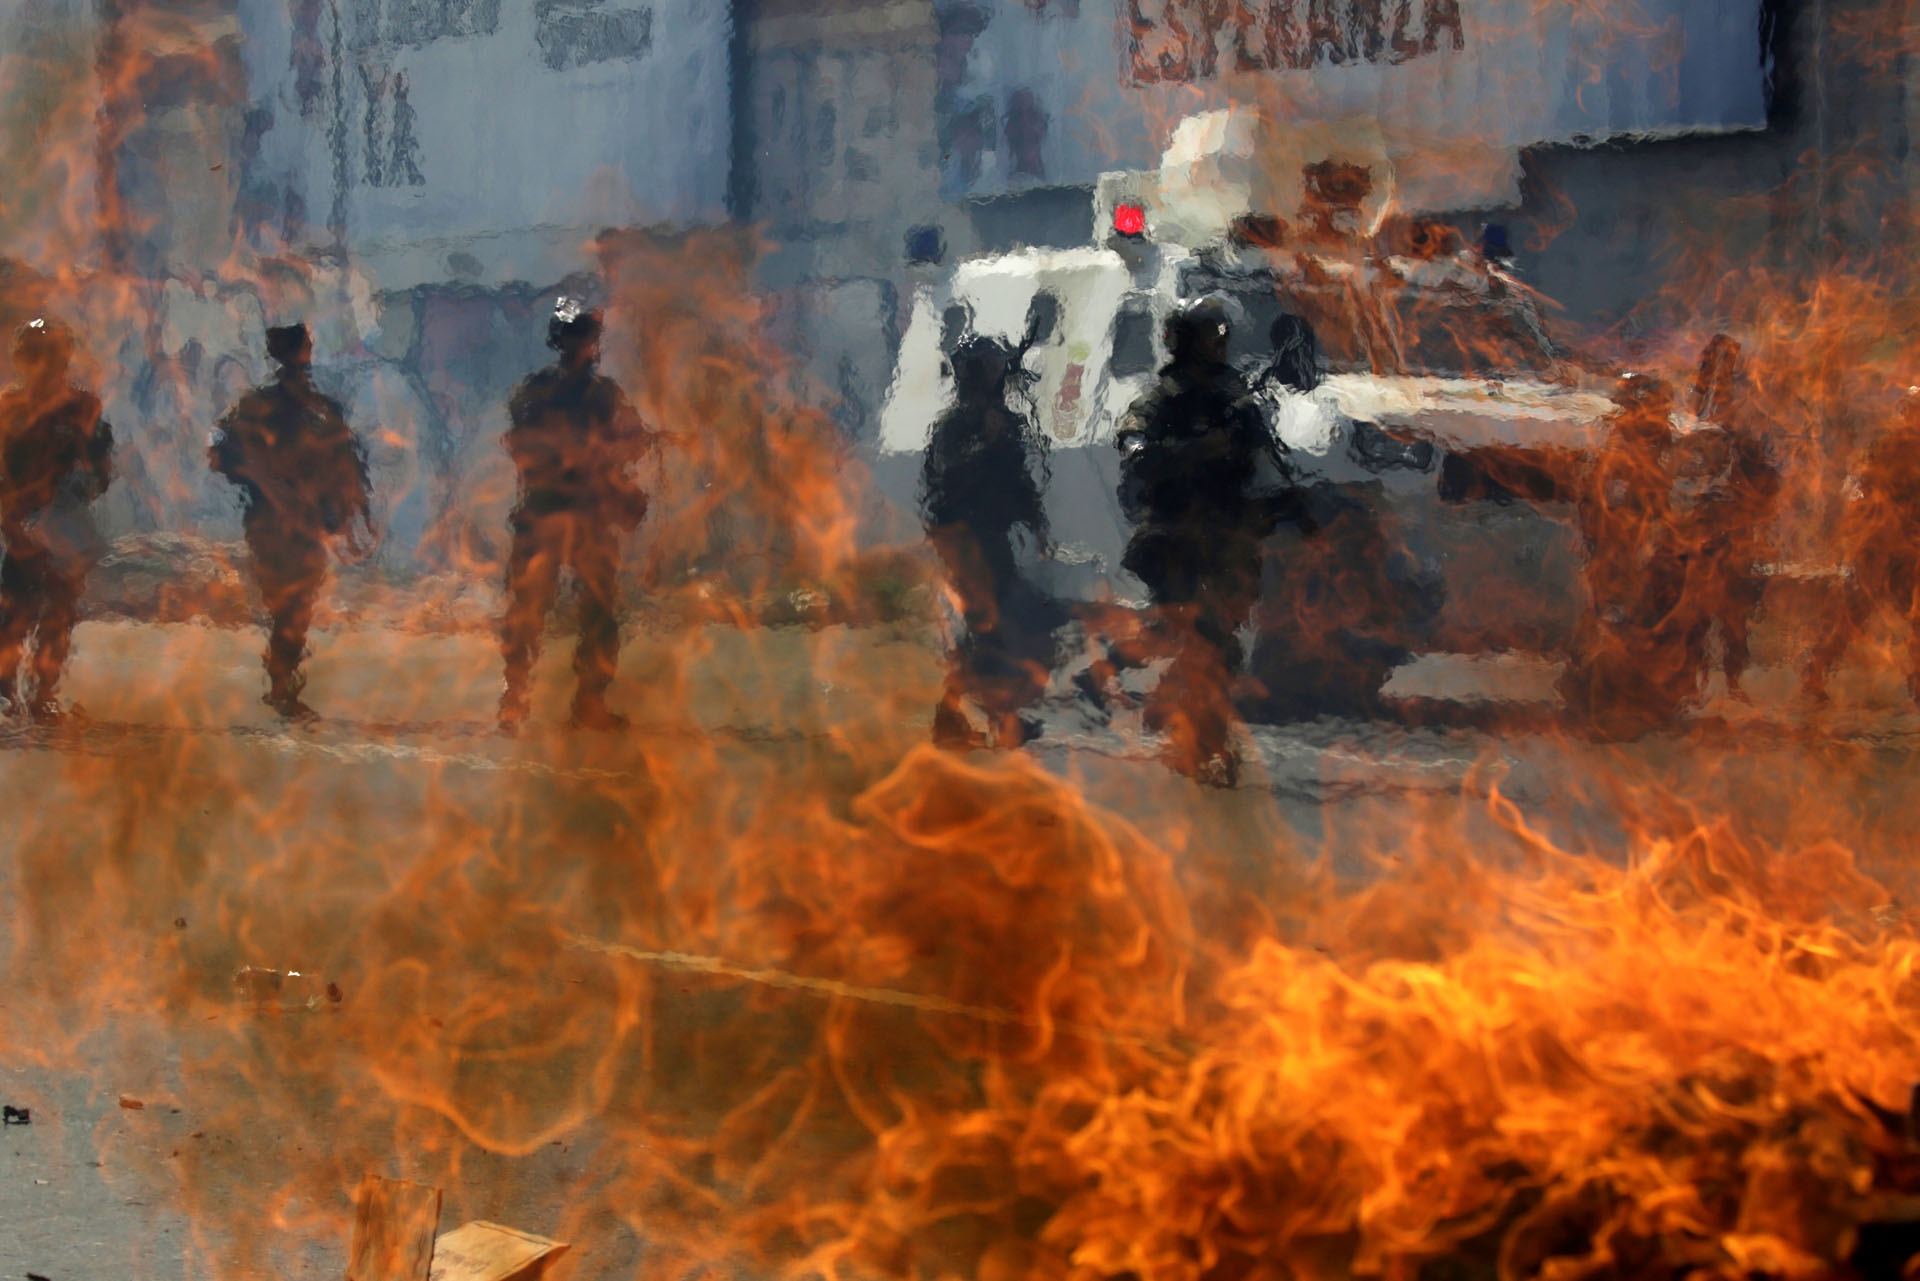 Venezuelan national guards walk behind a burning blockade during clashes with demonstrators during an opposition rally in Caracas, Venezuela, April 6, 2017. REUTERS/Marcos Bello